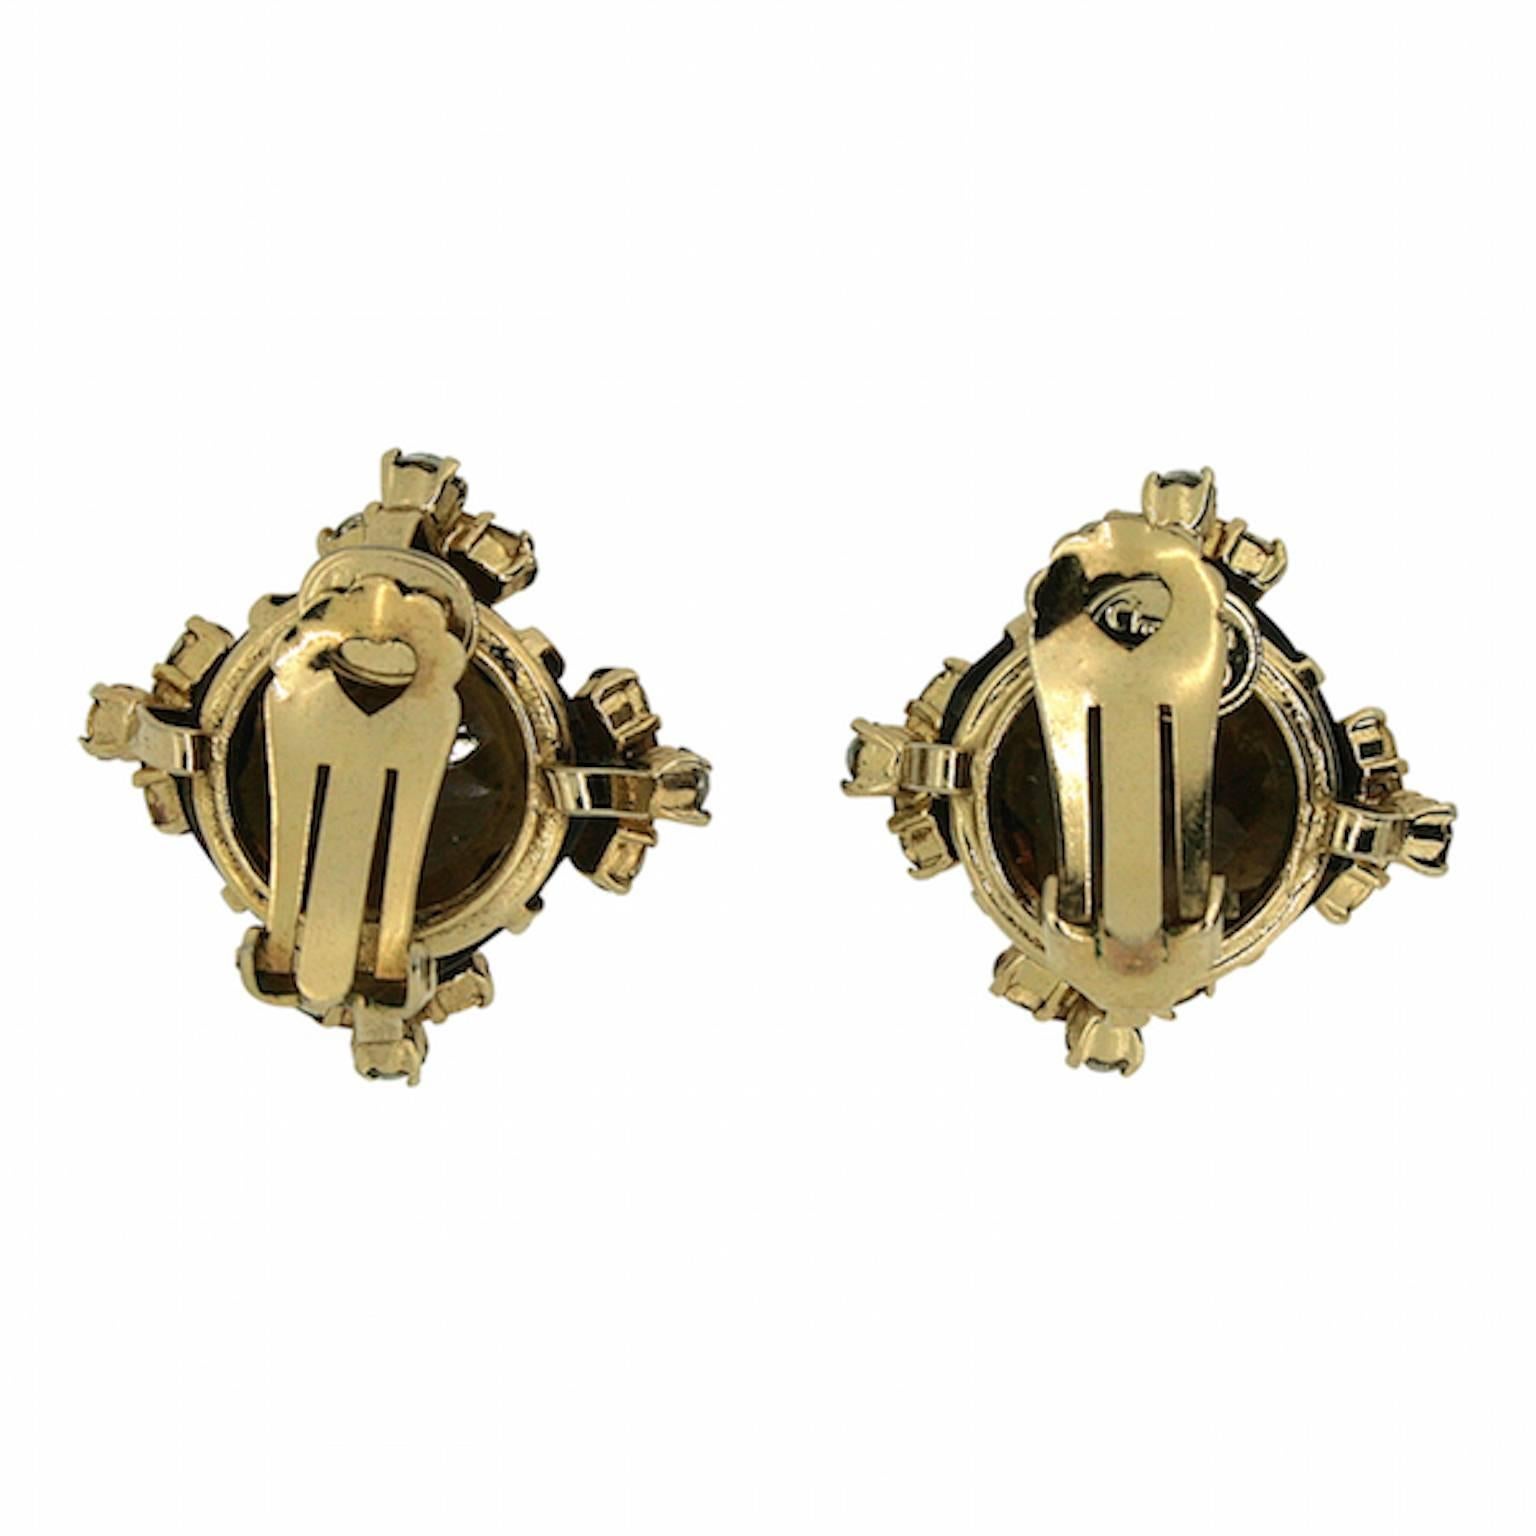 These stunning clip earrings illustrate the fine craftsmanship and innovative design of Christian Dior jewellery. They are a piece to be favoured by collectors and connoisseurs of beautiful design.
Condition Report:
Excellent
The Details...
These